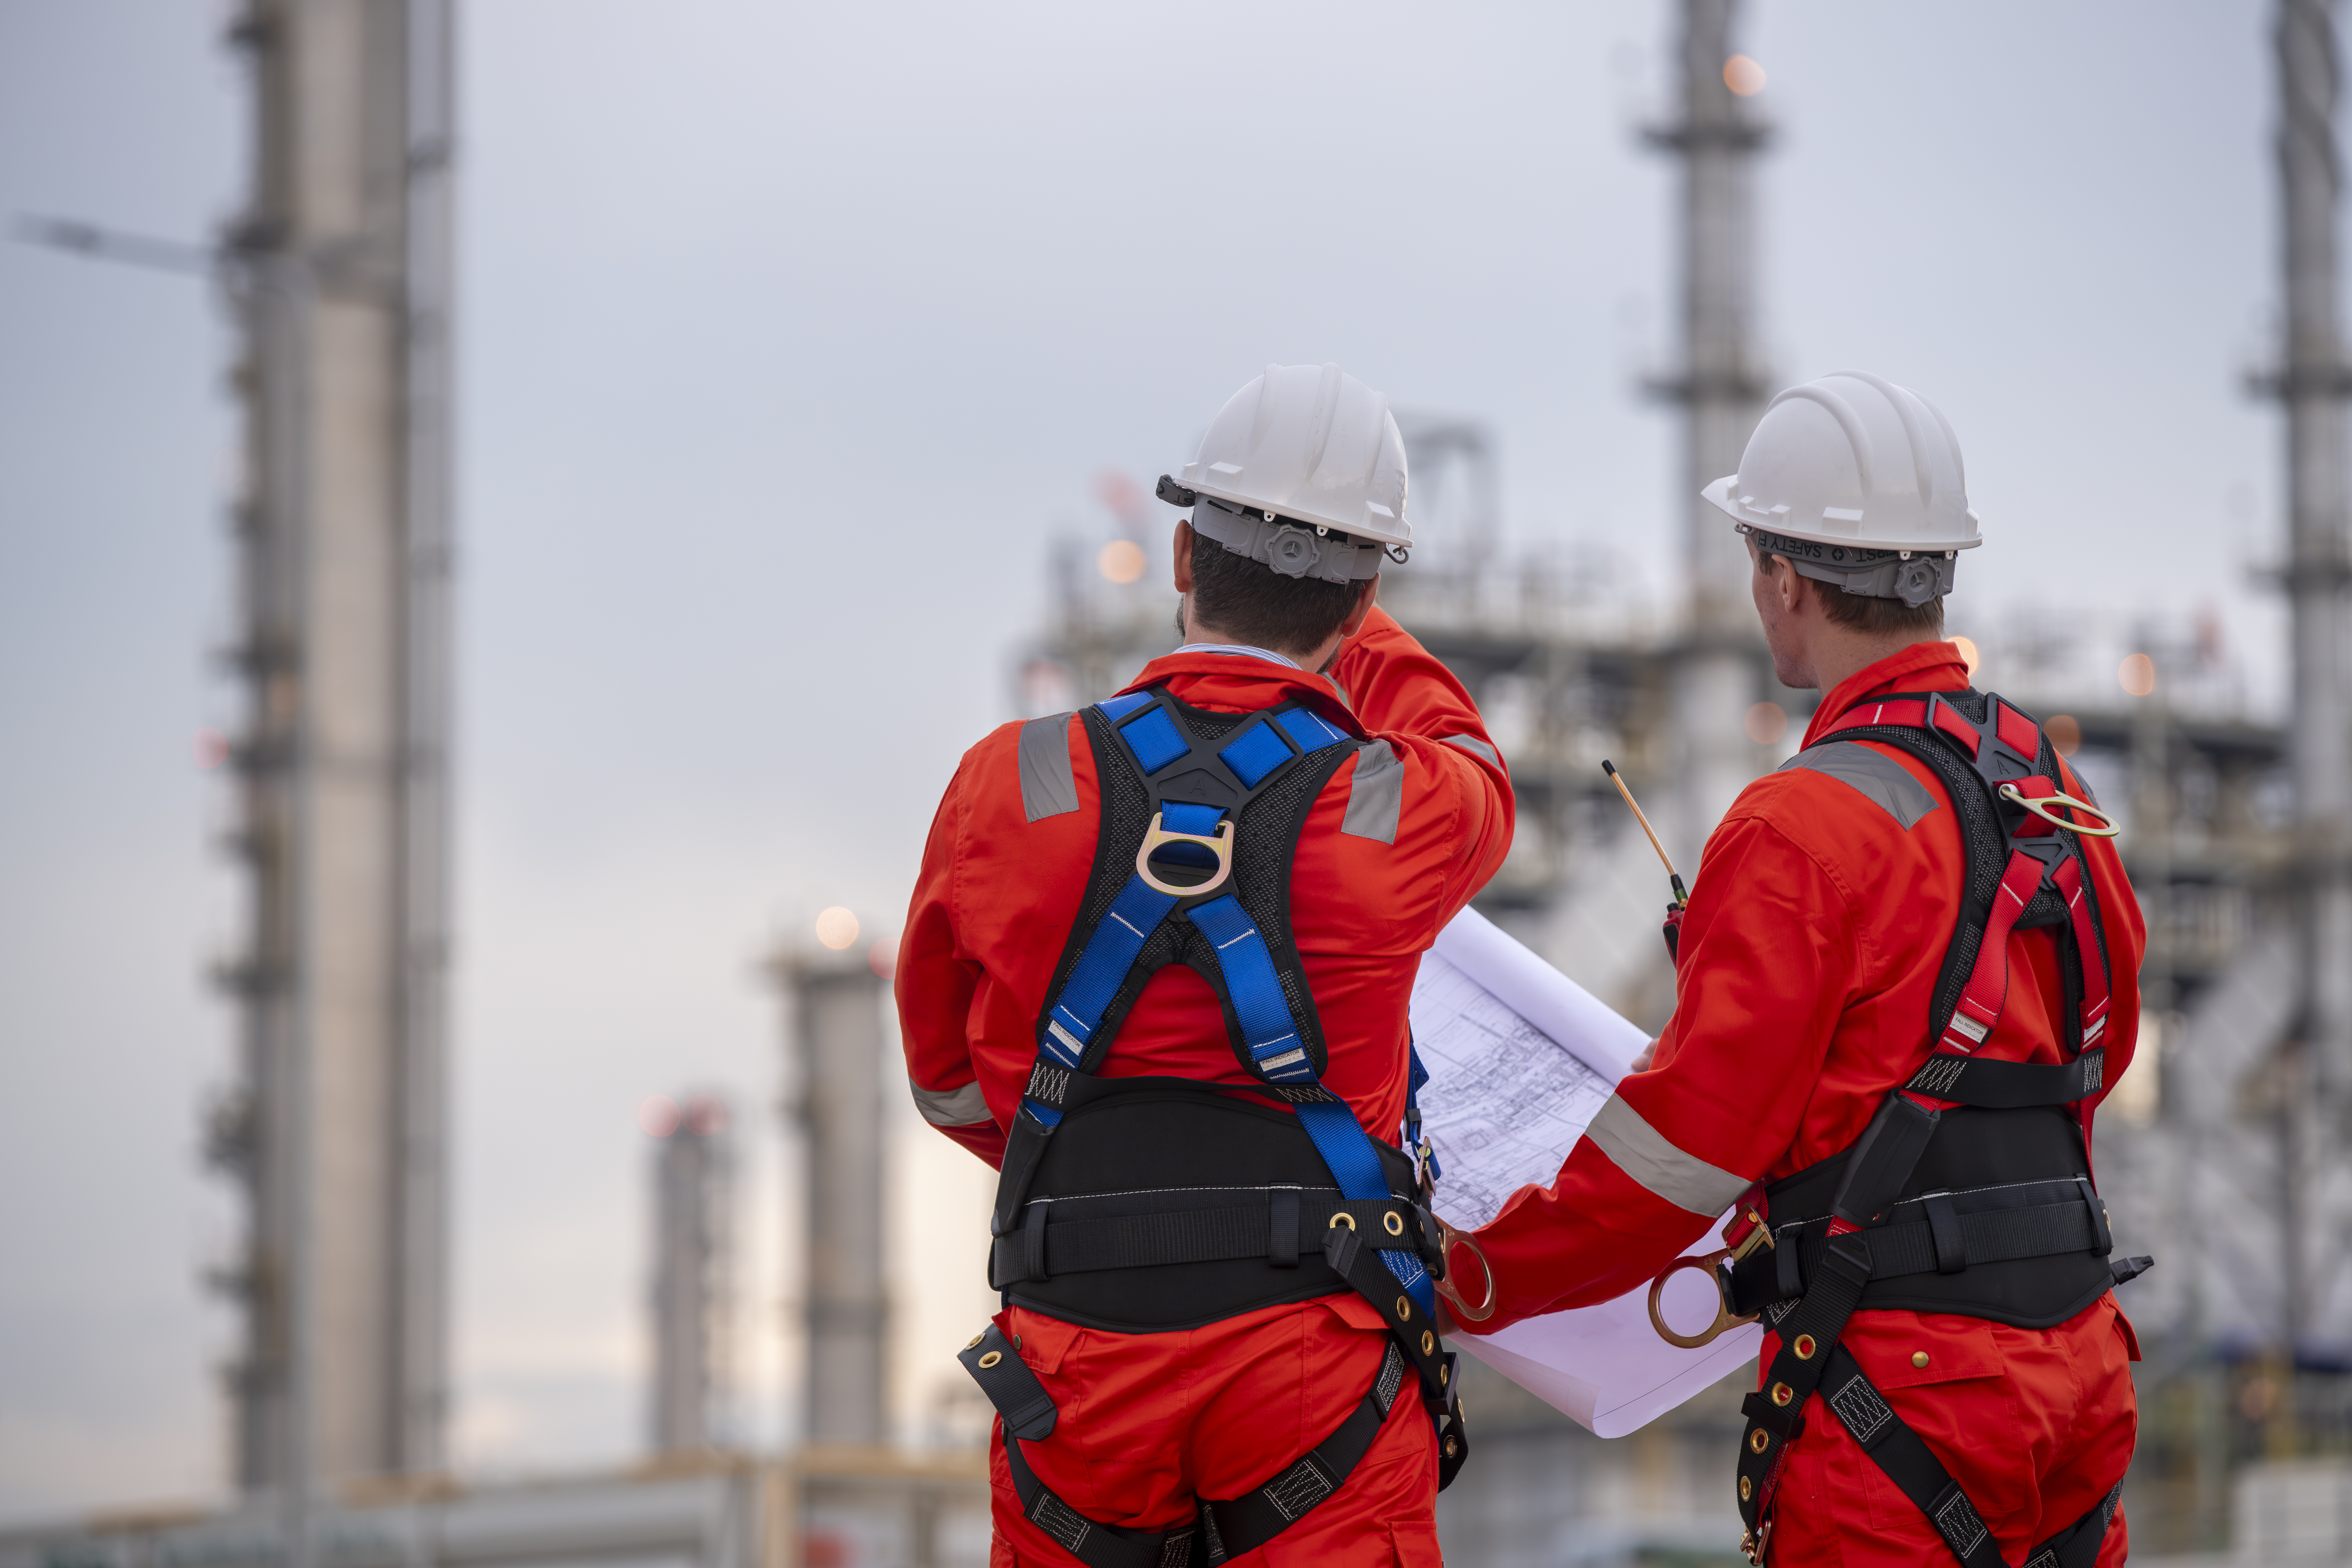 Fall Protection Solutions in the Oil and Gas Industry with Tiger Safety Rentals